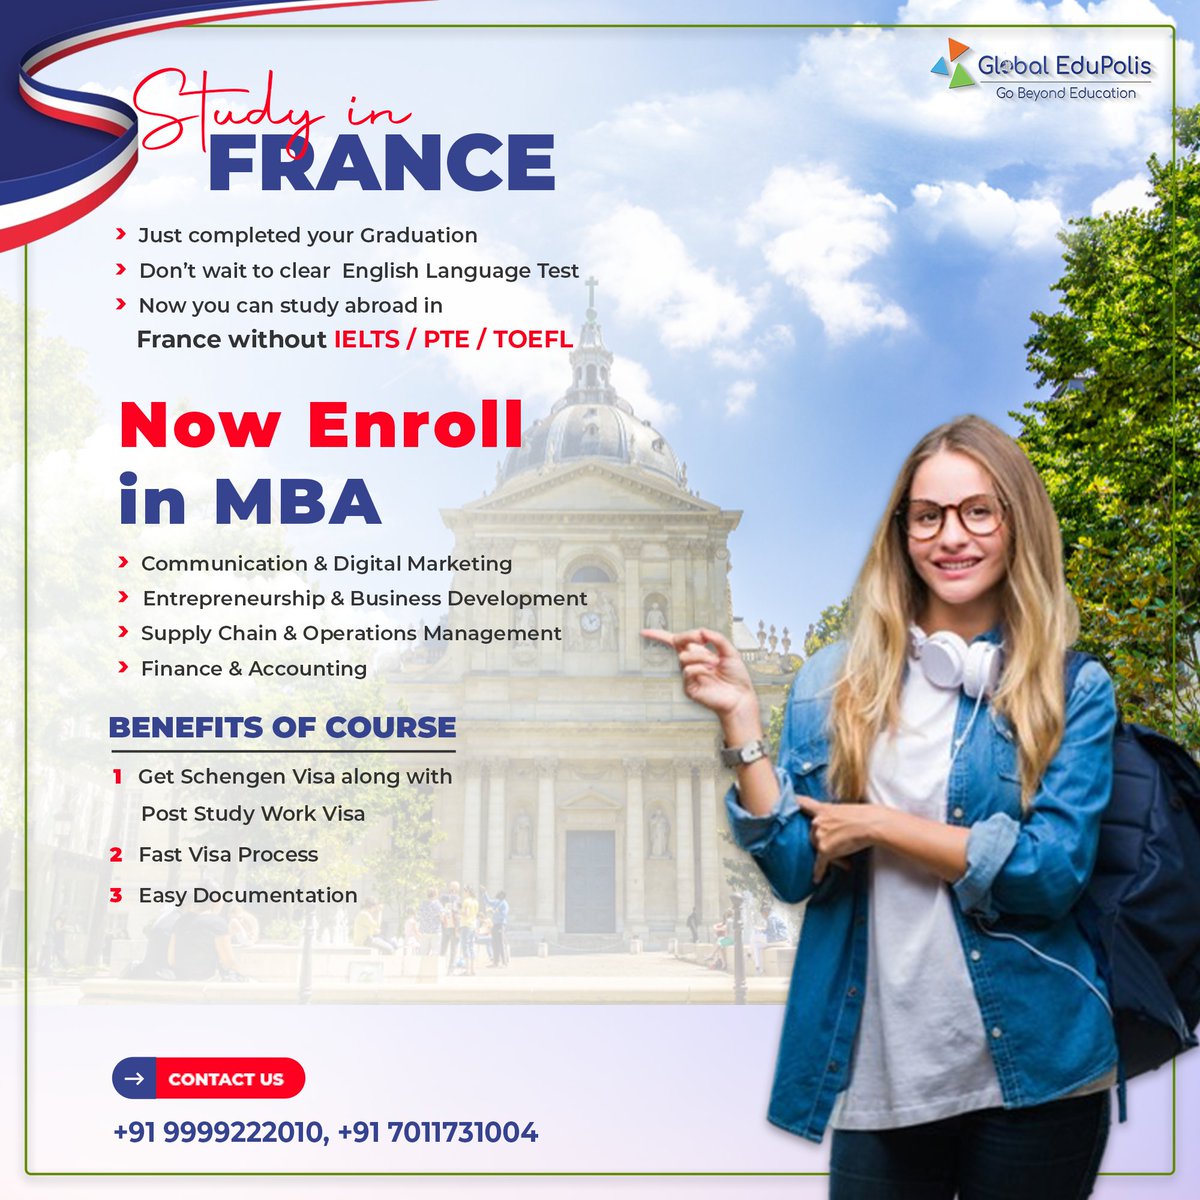 ☑Just completed your Graduation.
☑Don't wait to clear any Language Test.
☑Now you can study abroad in France without IELTS/
PTE/ TOEFL.

Enroll in MBA.

Apply Now!
Apply link is in Bio📍
.
.
.
.
.
#globaledupolis #MBA #studyinfrance #IELTS #toefl
#studyabroad